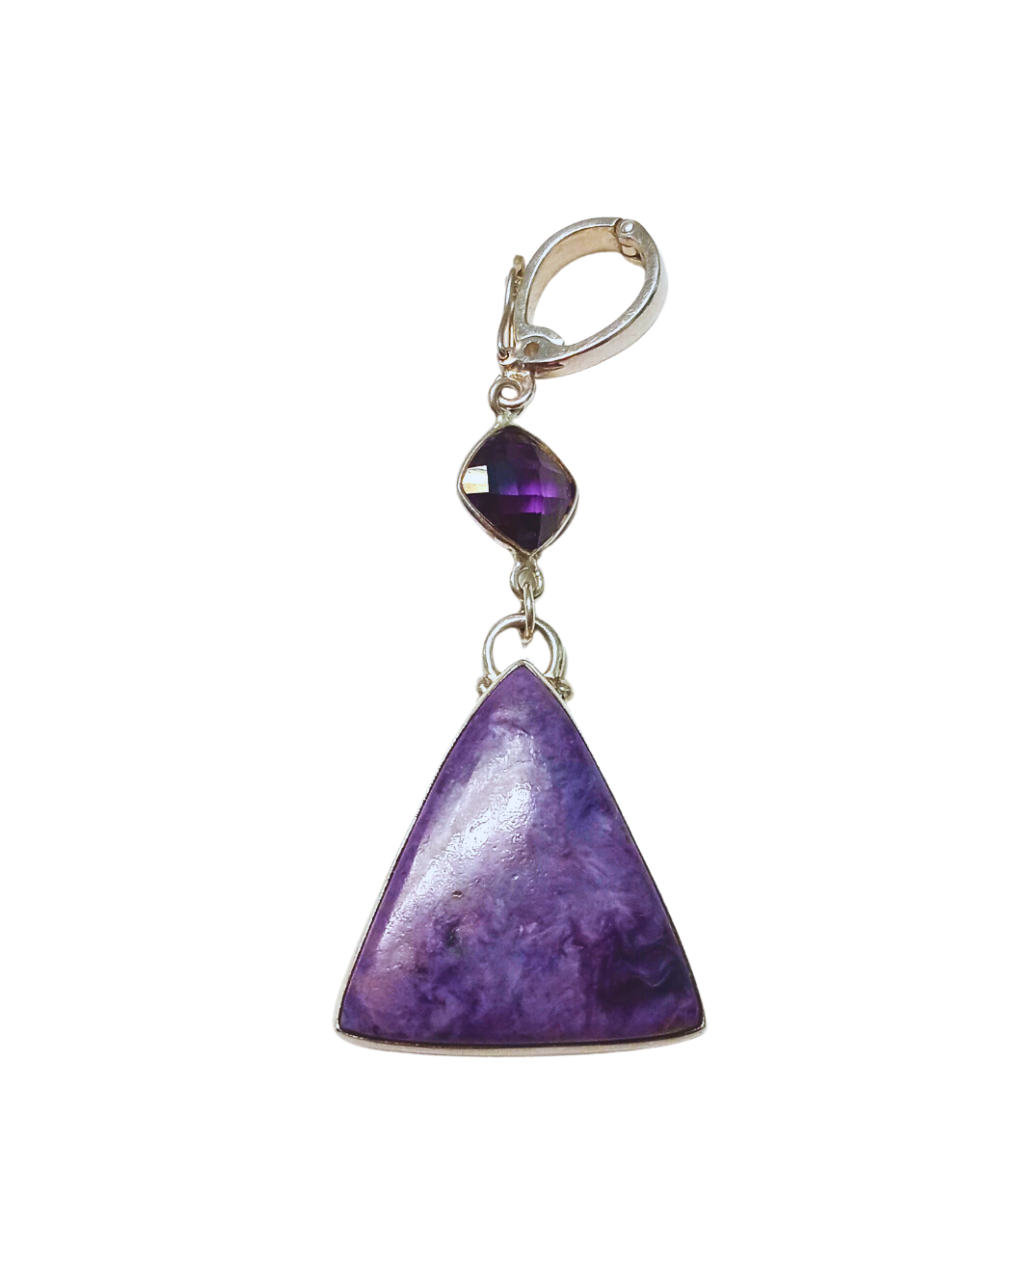 Rare Charoite Large Triangle-shaped, and Checkerboard Faceted Amethyst Sterling Silver Enhancer Pendant Approx. 2 1/4"L X 7/8"W. ONE ONLY.